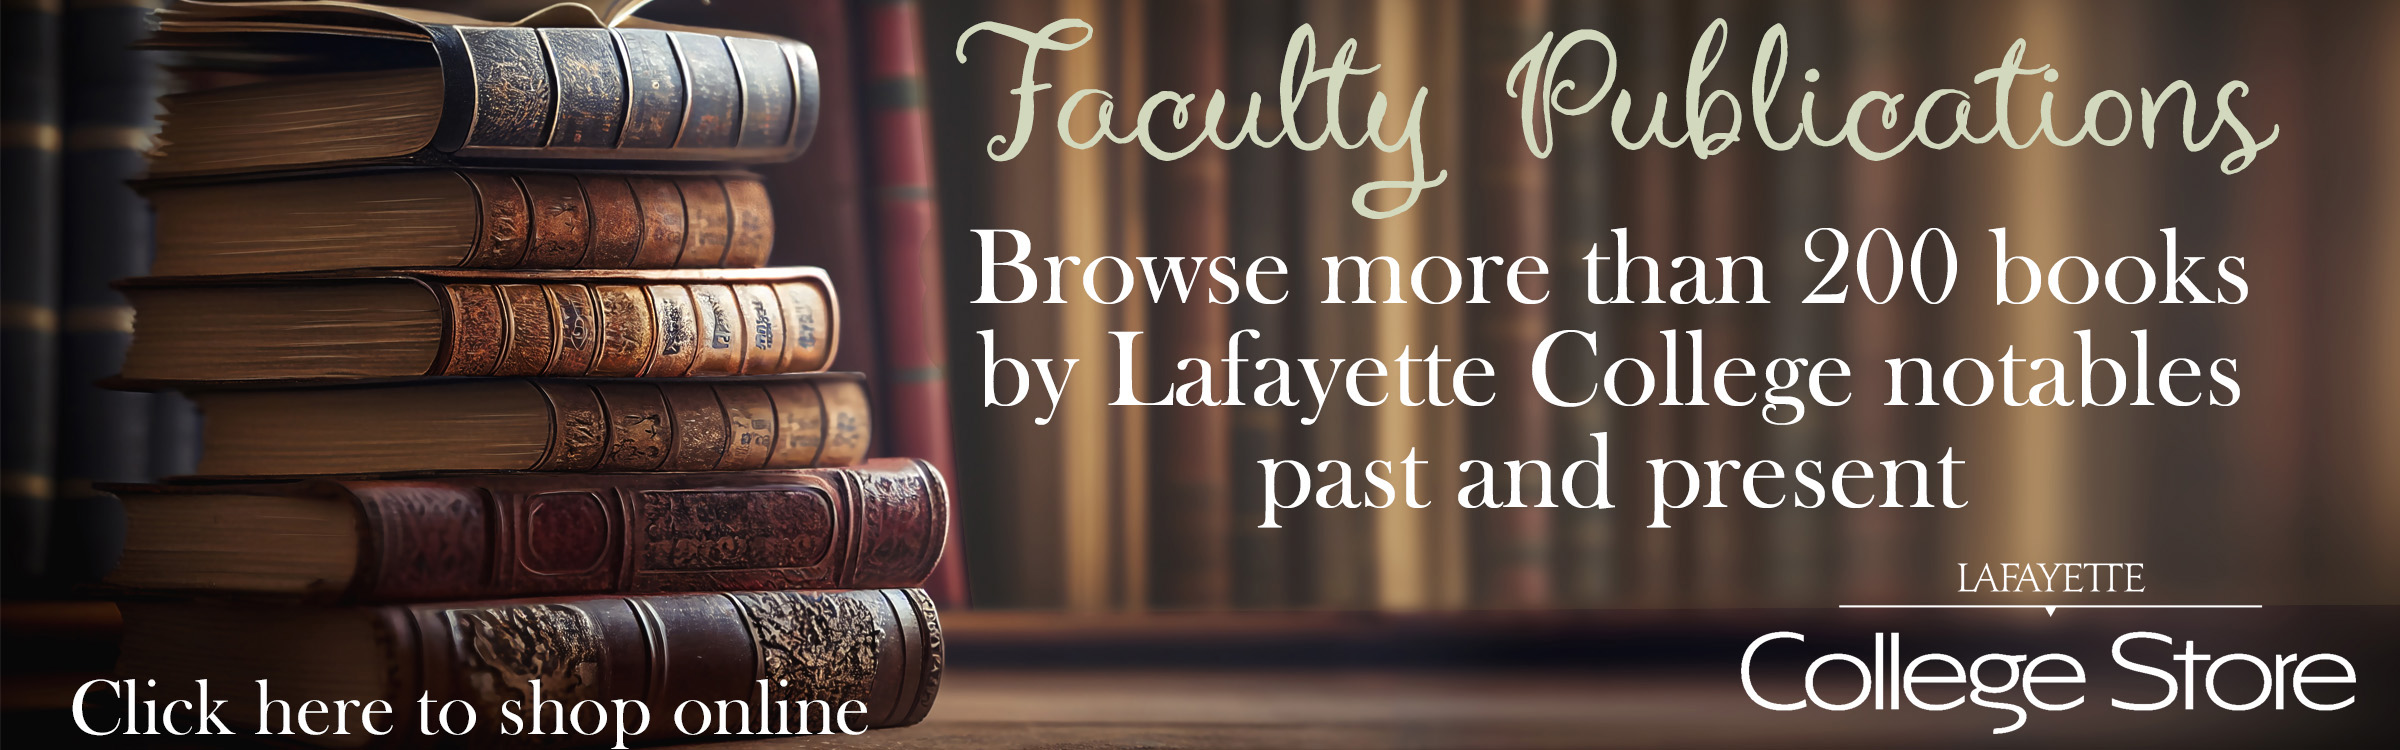 Browse more than 200  books by Lafayette College notables past and present.